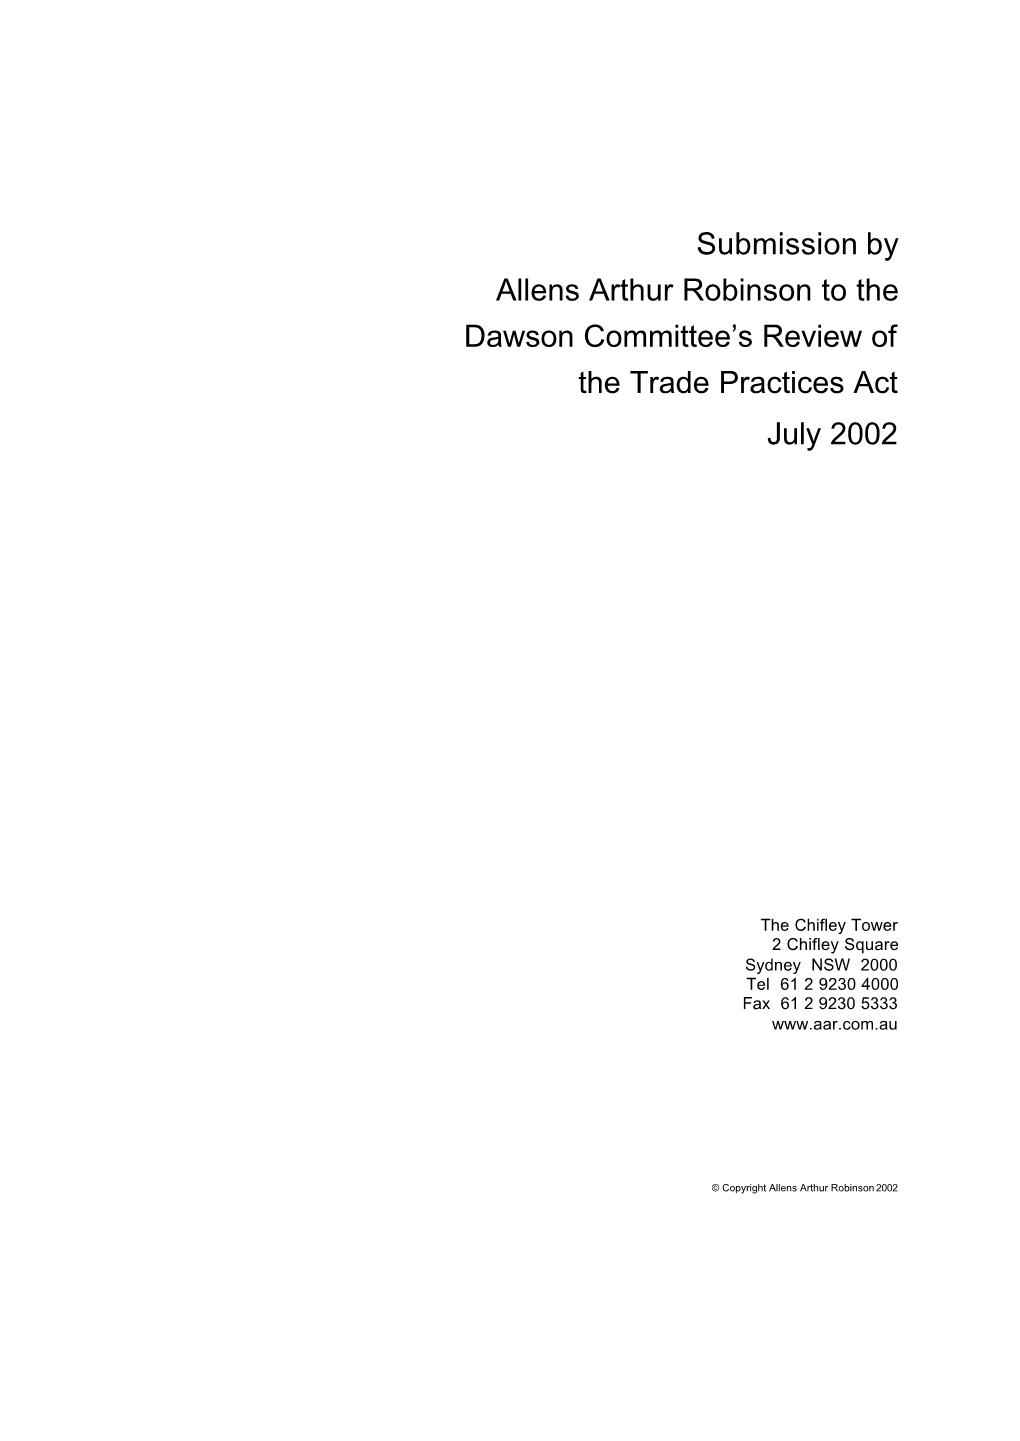 Submission by Allens Arthur Robinson to the Dawson Committee's Review of the Trade Practices Act July 2002